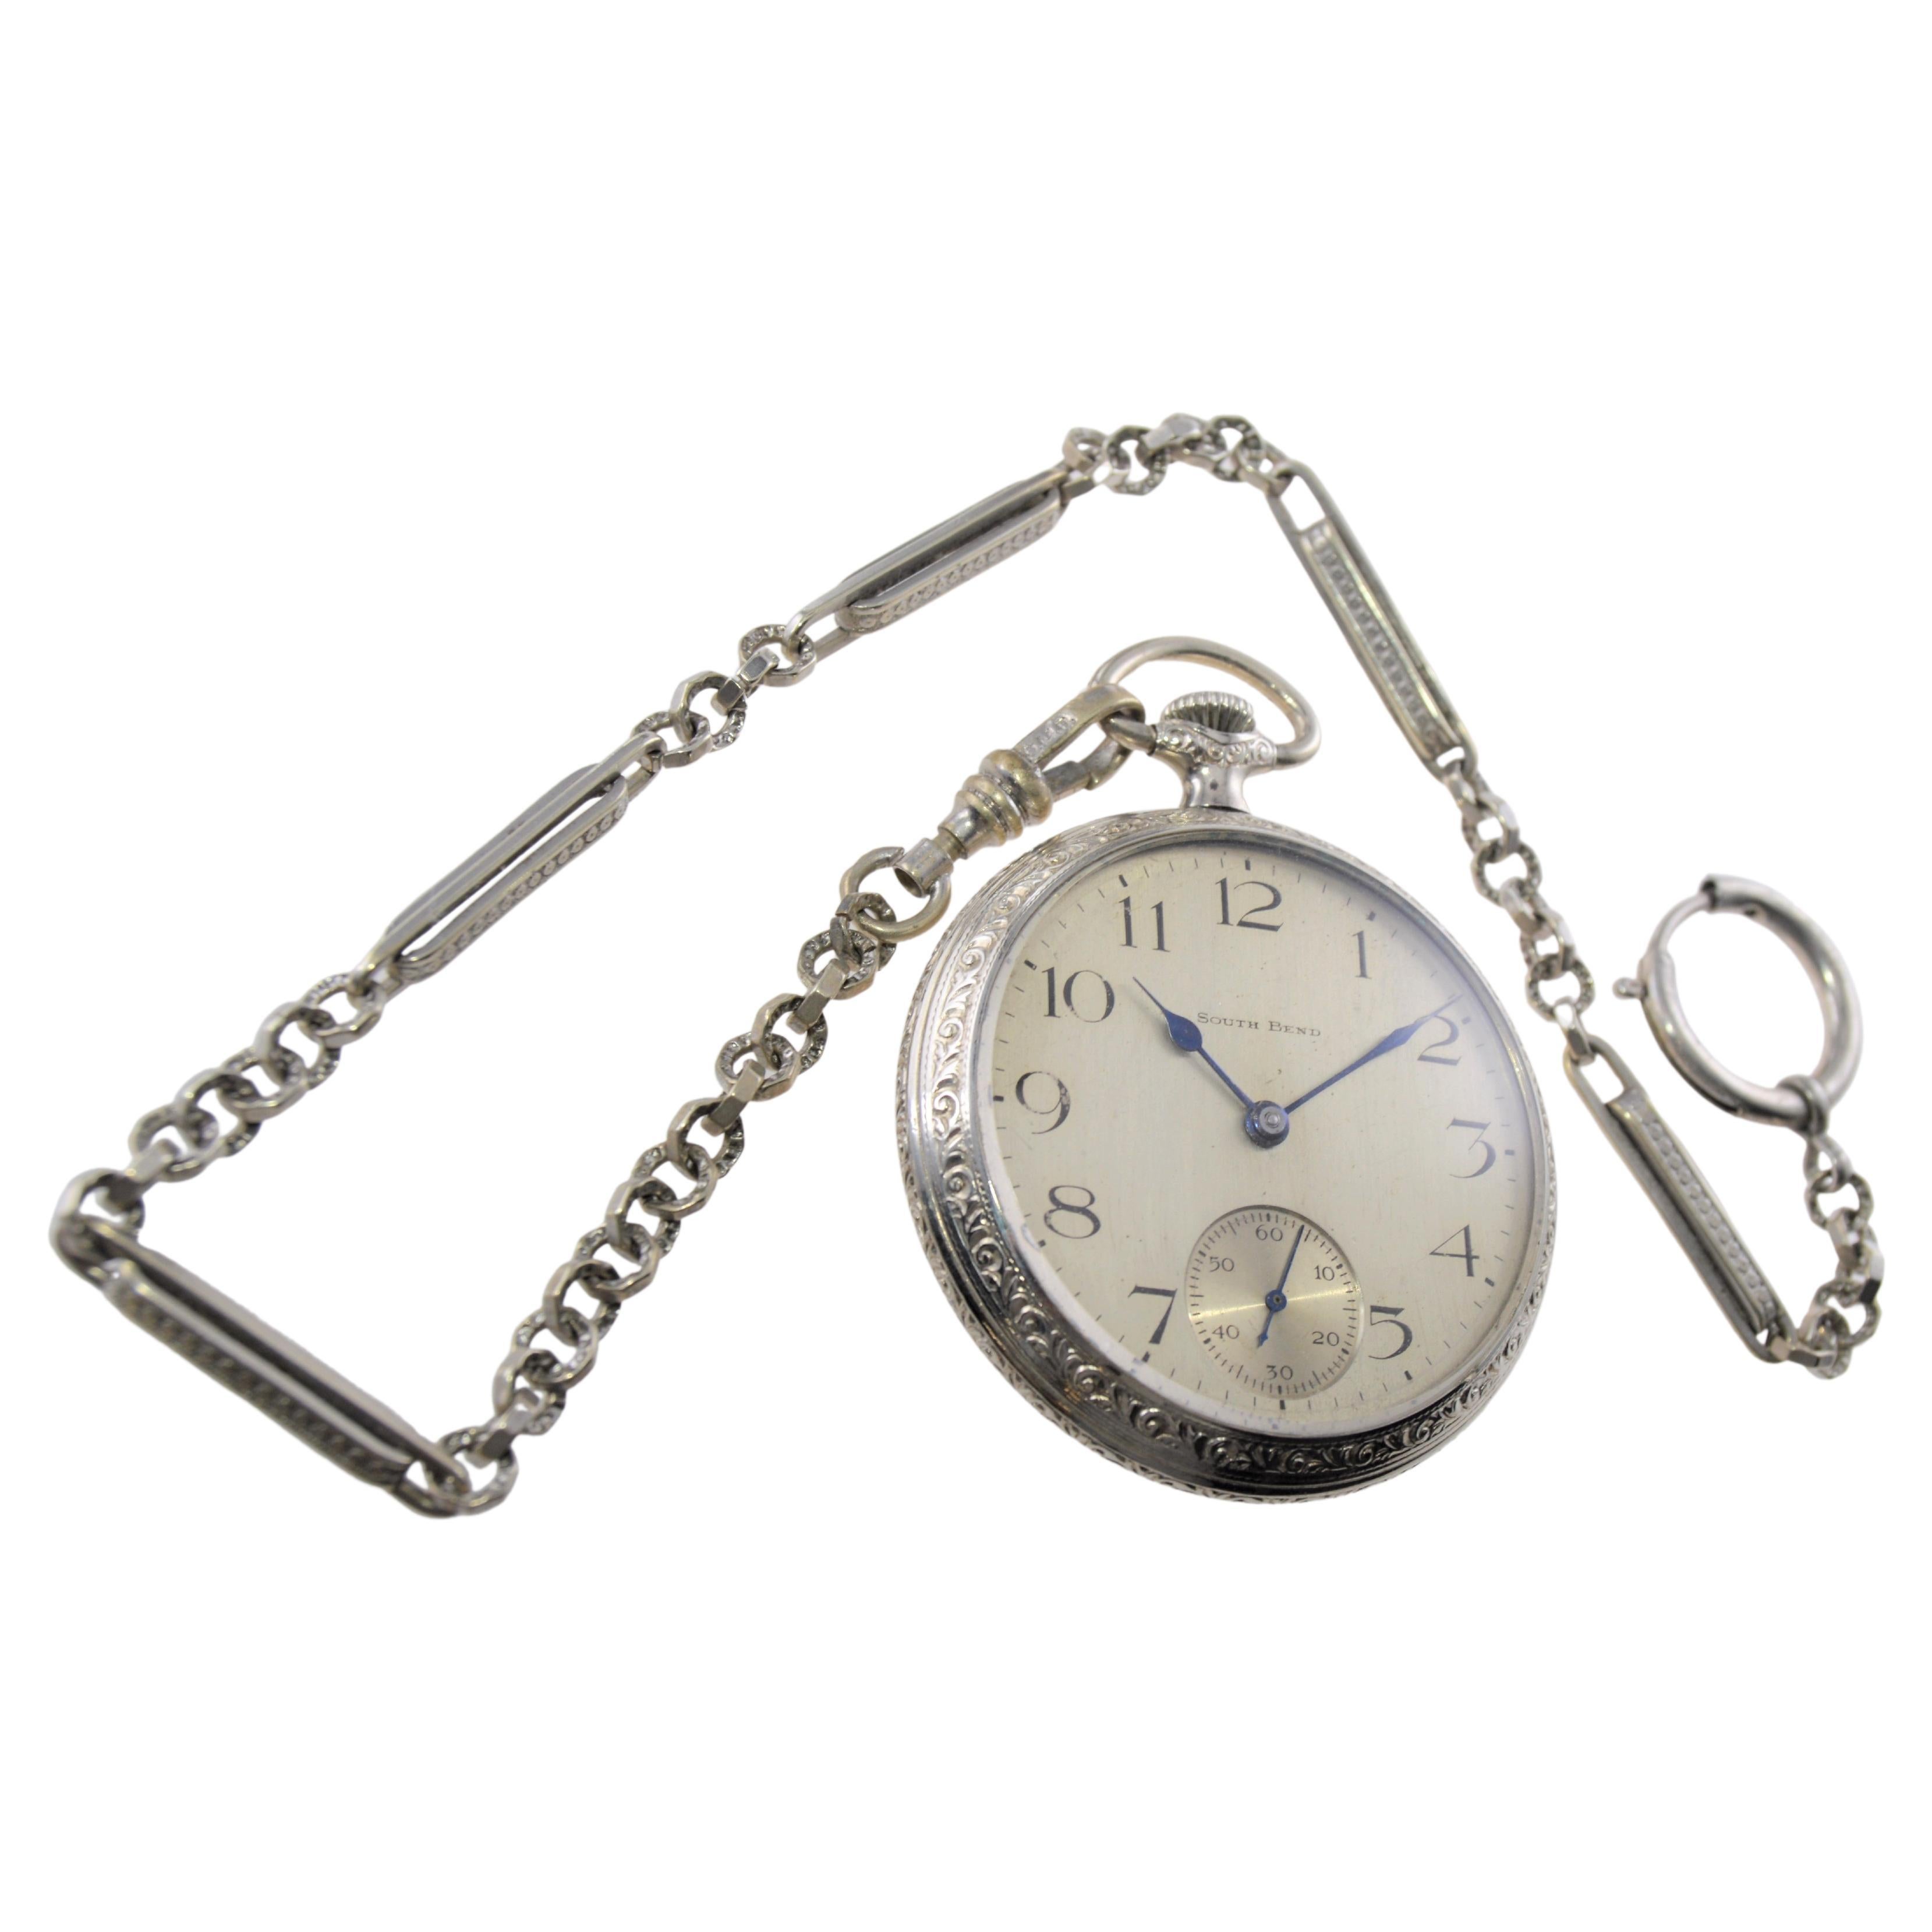 South Bend Open Faced Pocket Watch Gold Filled with Original Silvered Dial 1900